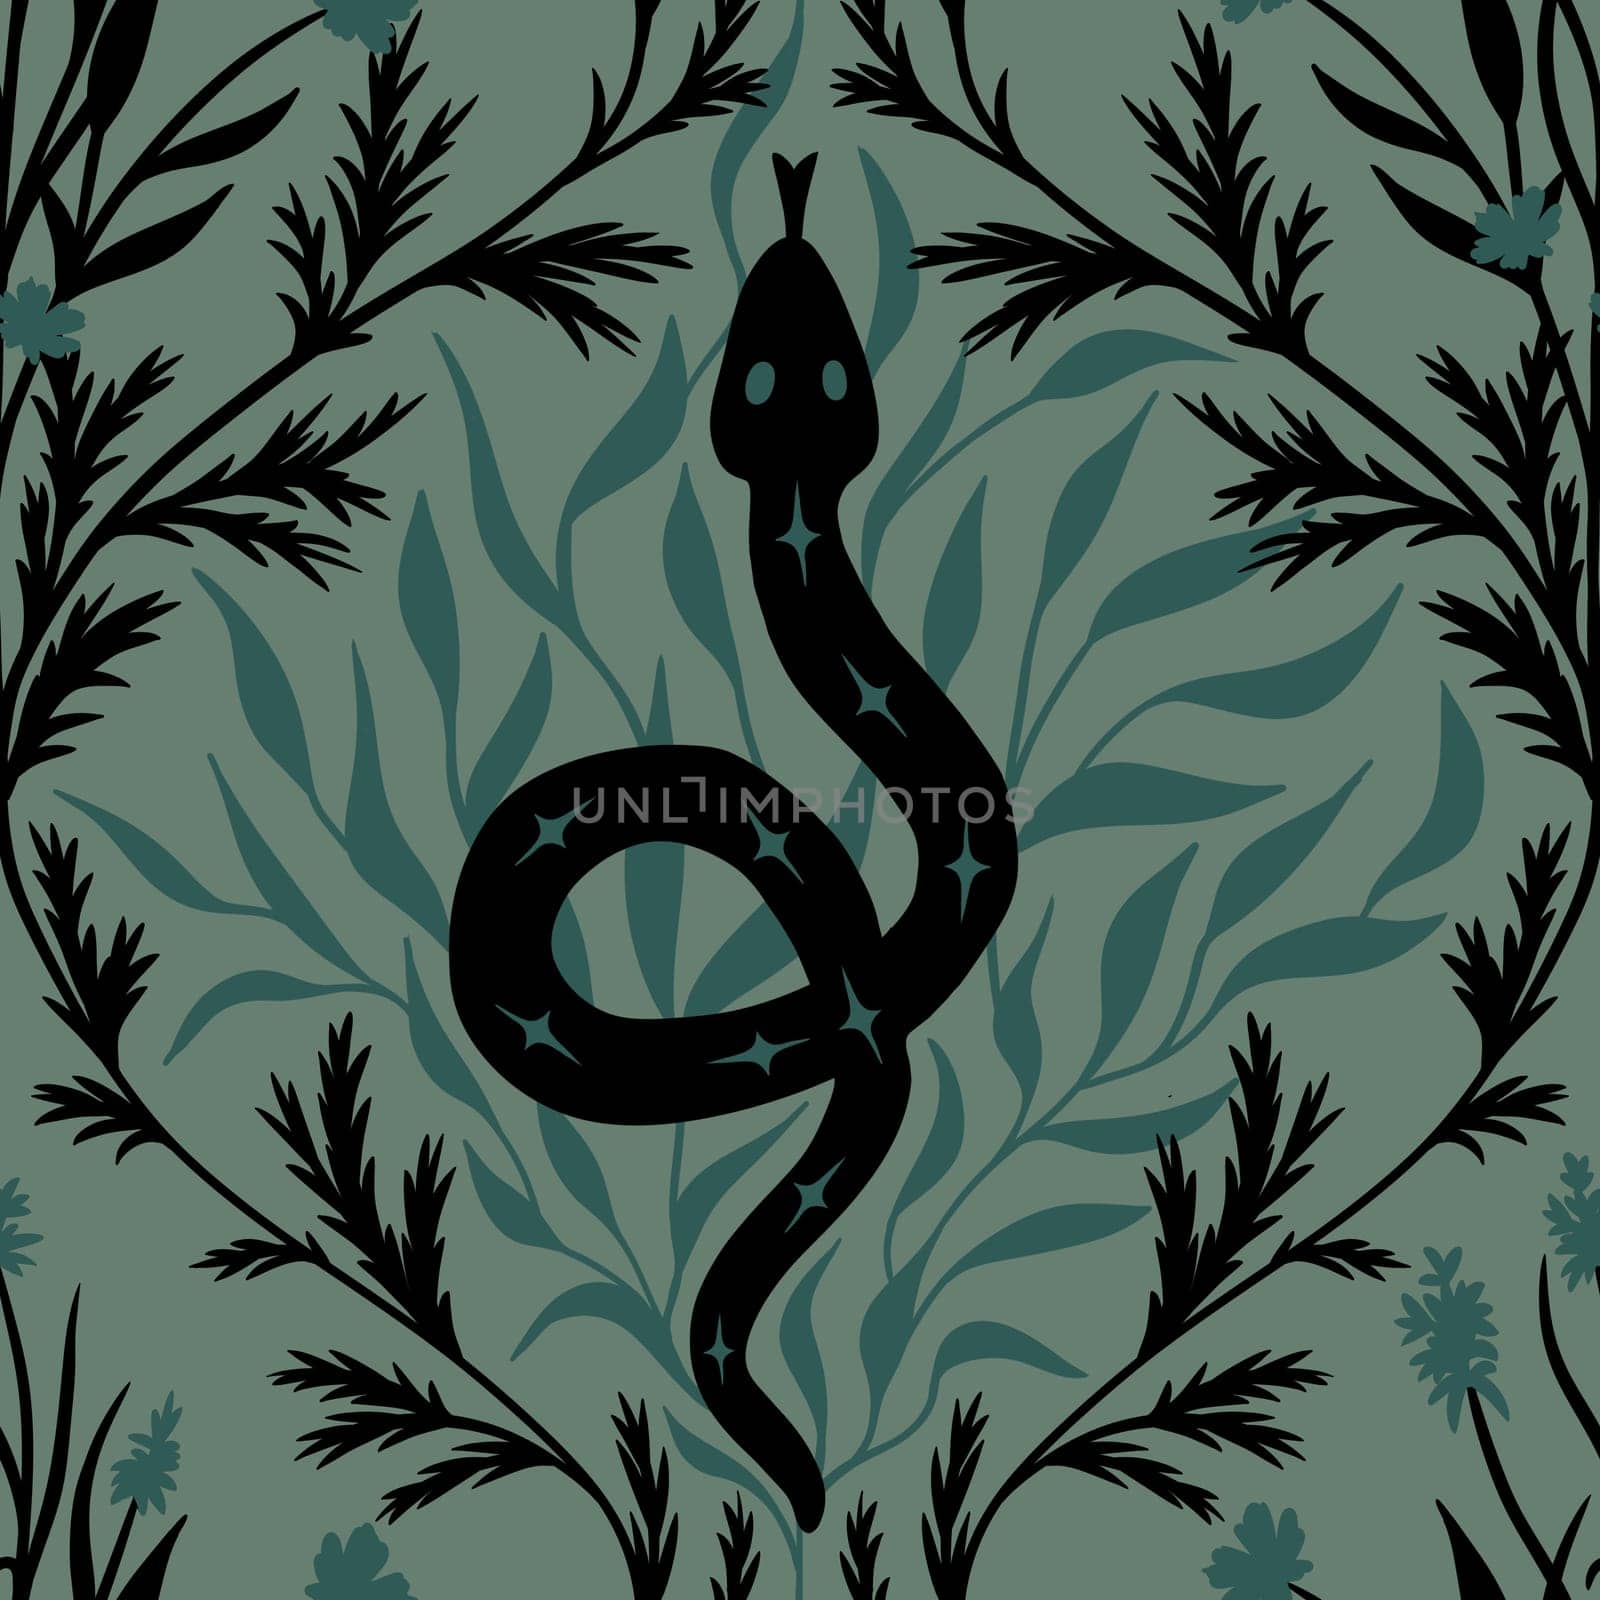 Hand drawn seamless pattern of black snake on sage green background with forest leaves. Witch witchcraft mystic occult boho design, teal grey esoteric gothic halloween print serpent art